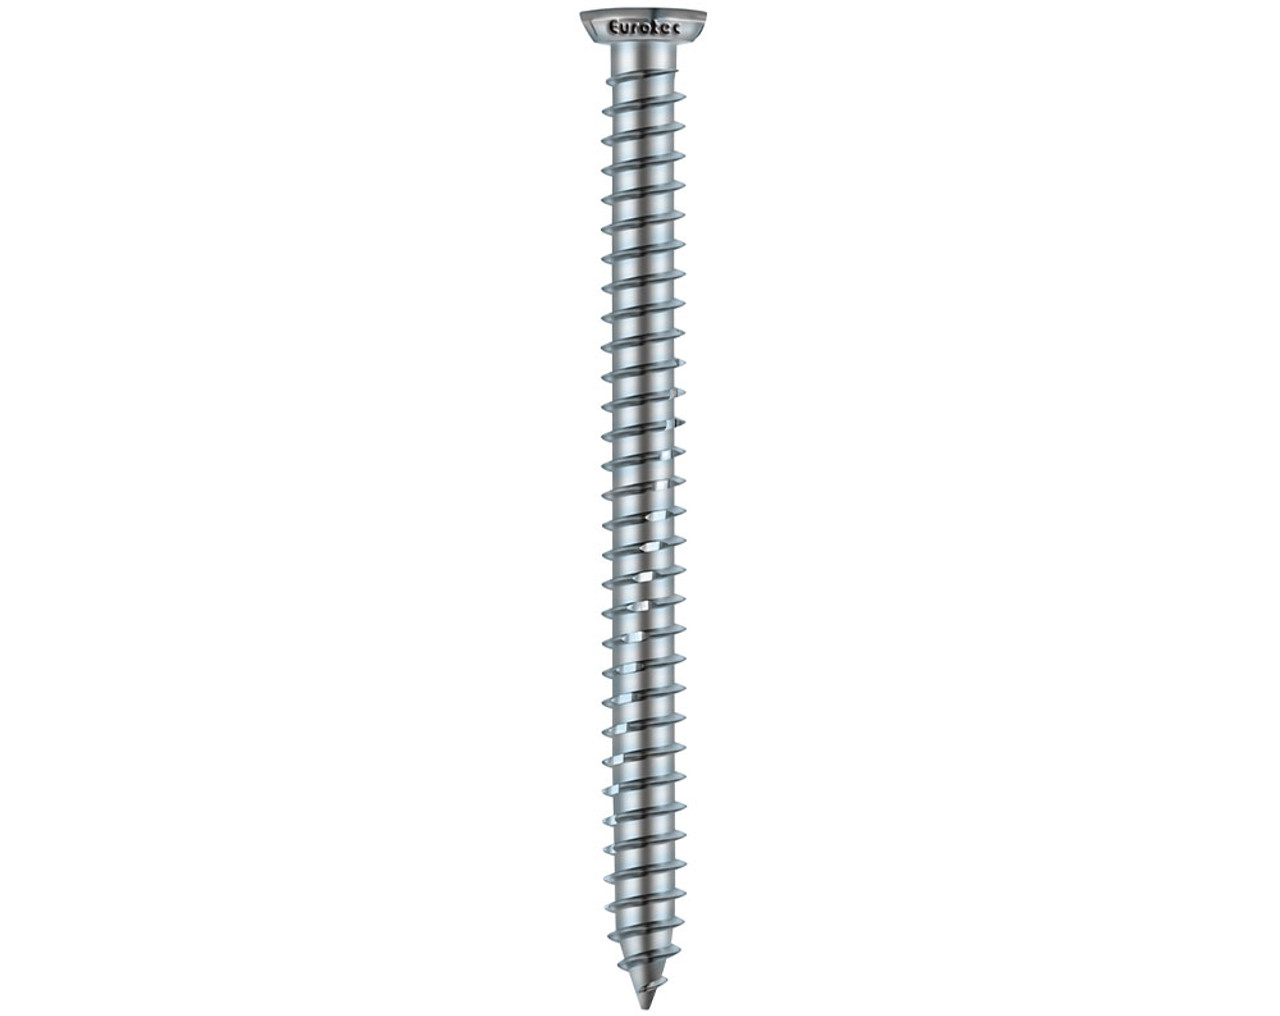 EUROTEC Screws | 7.5mm T30 Concrete Frame Screws Countersunk Head with Full Thread in Silver Zinc